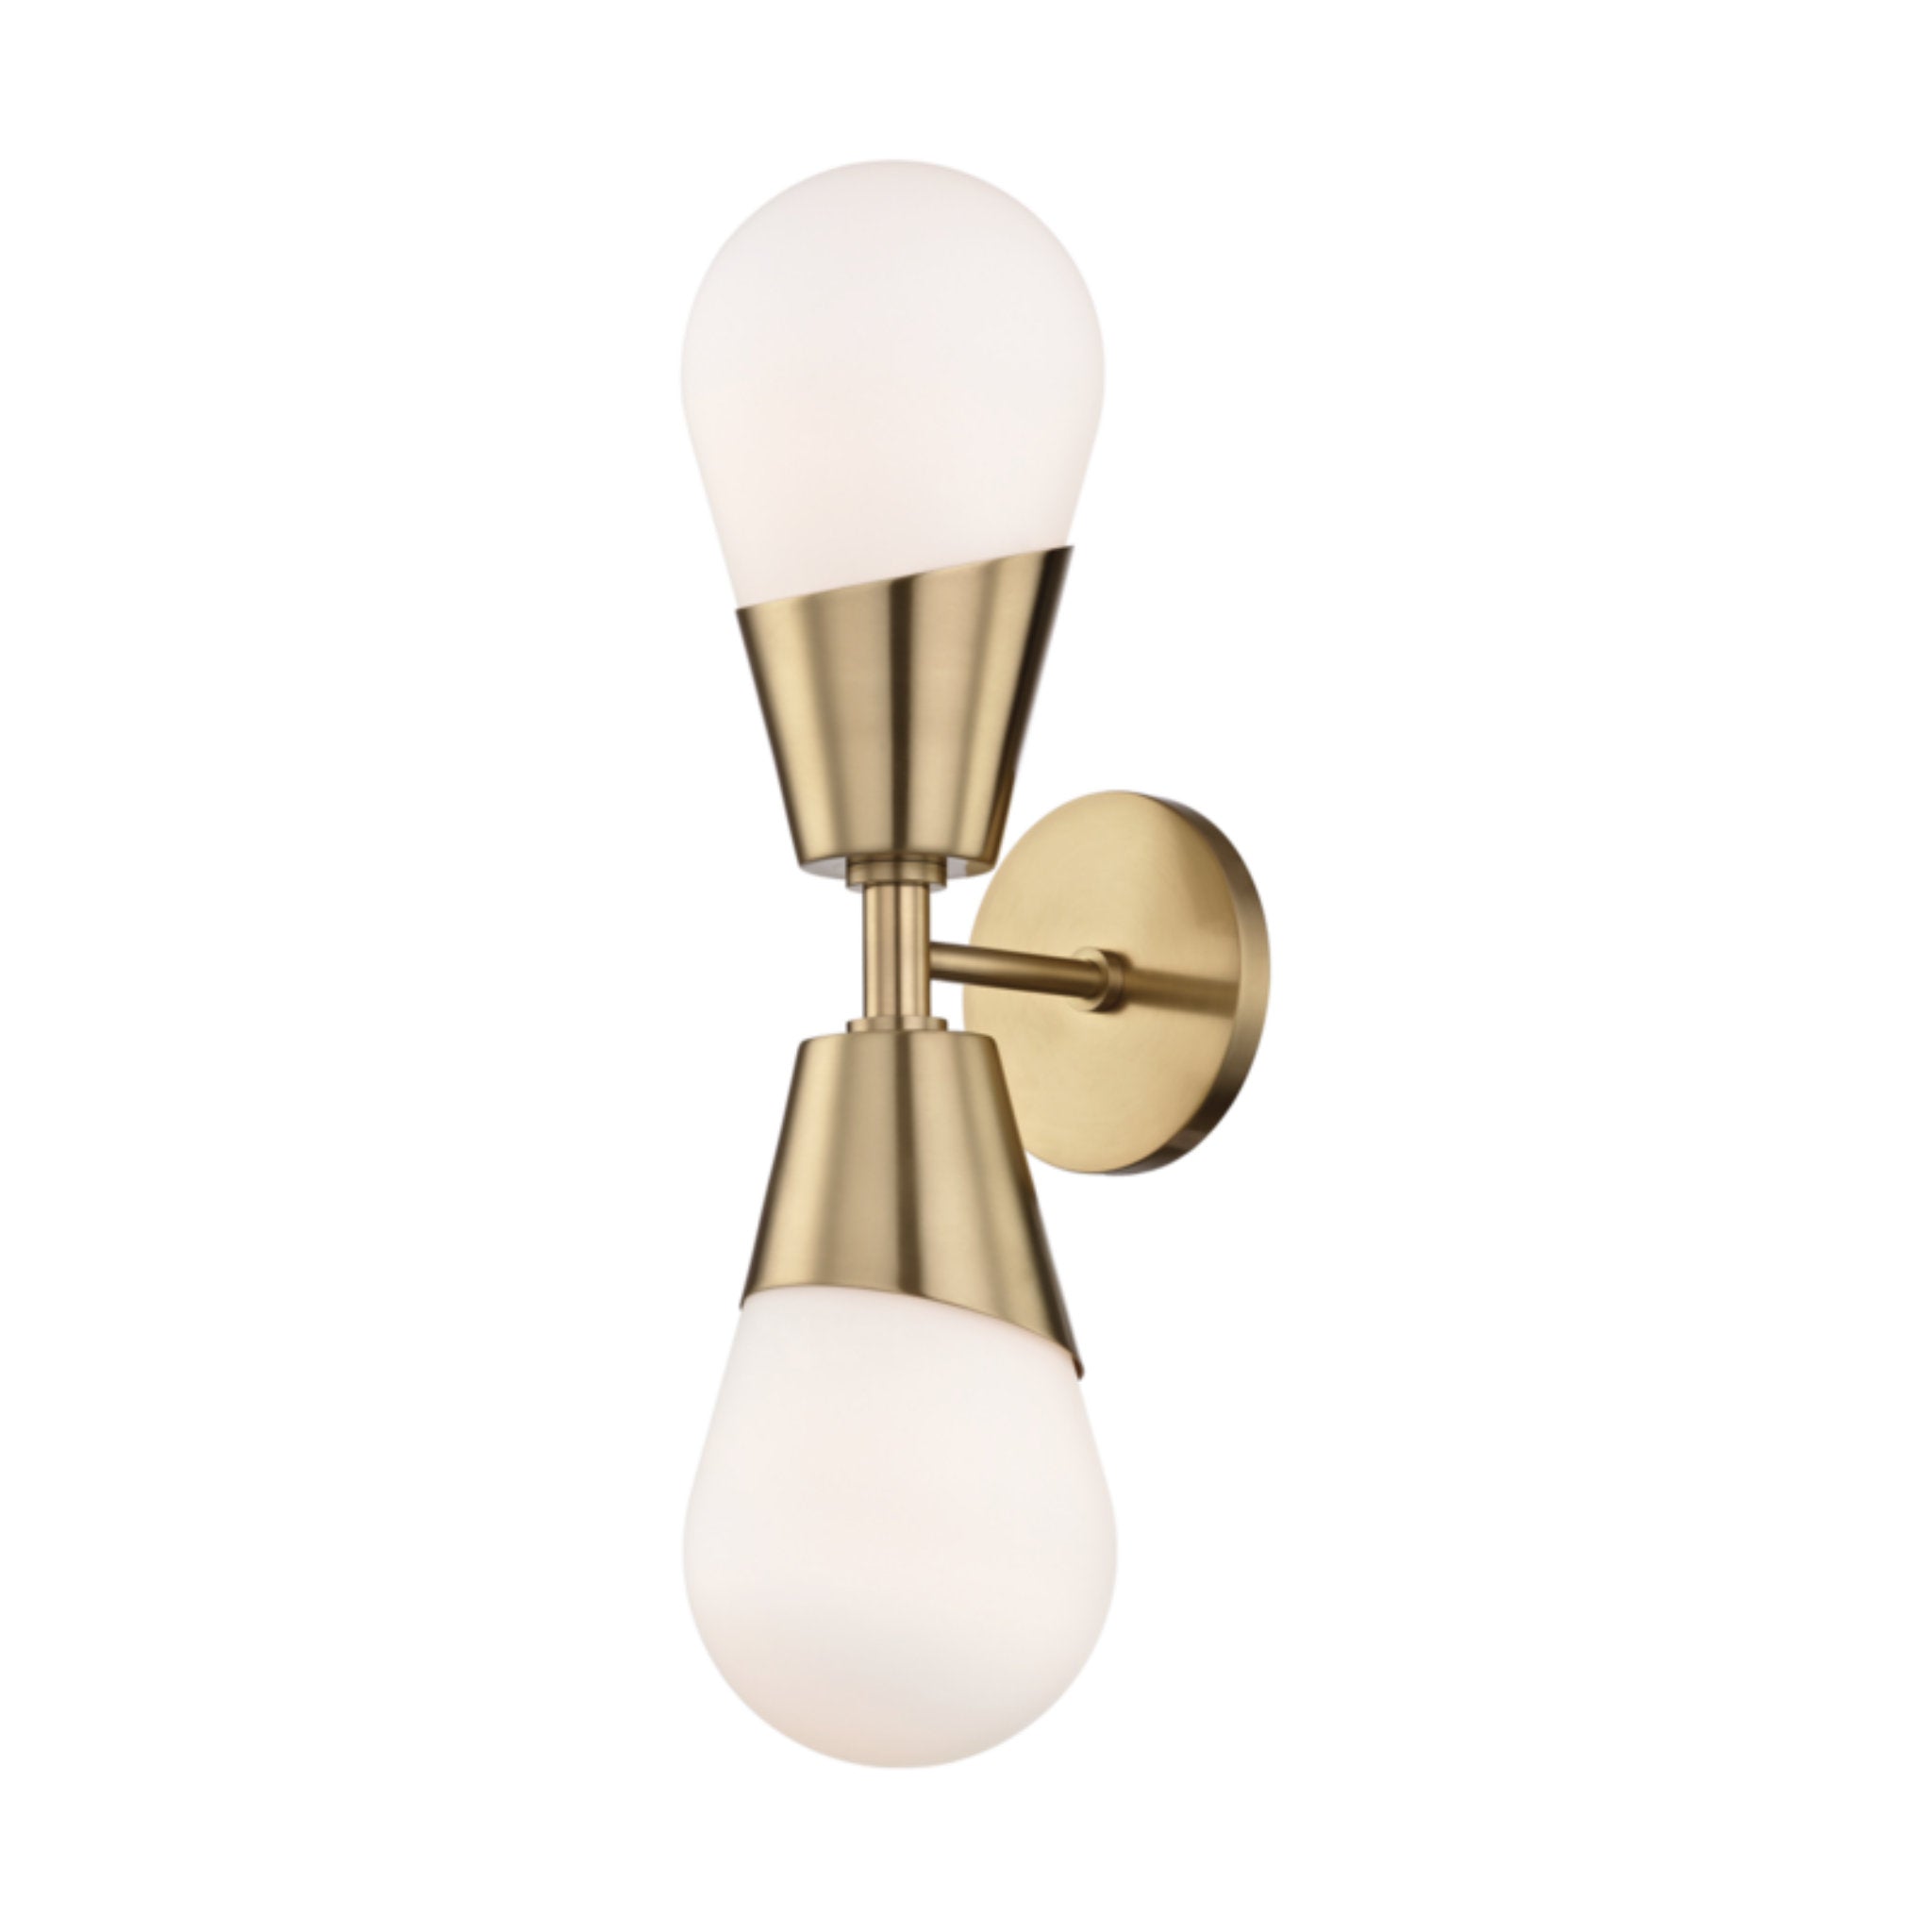 Cora 2-Light Wall Sconce in Aged Brass